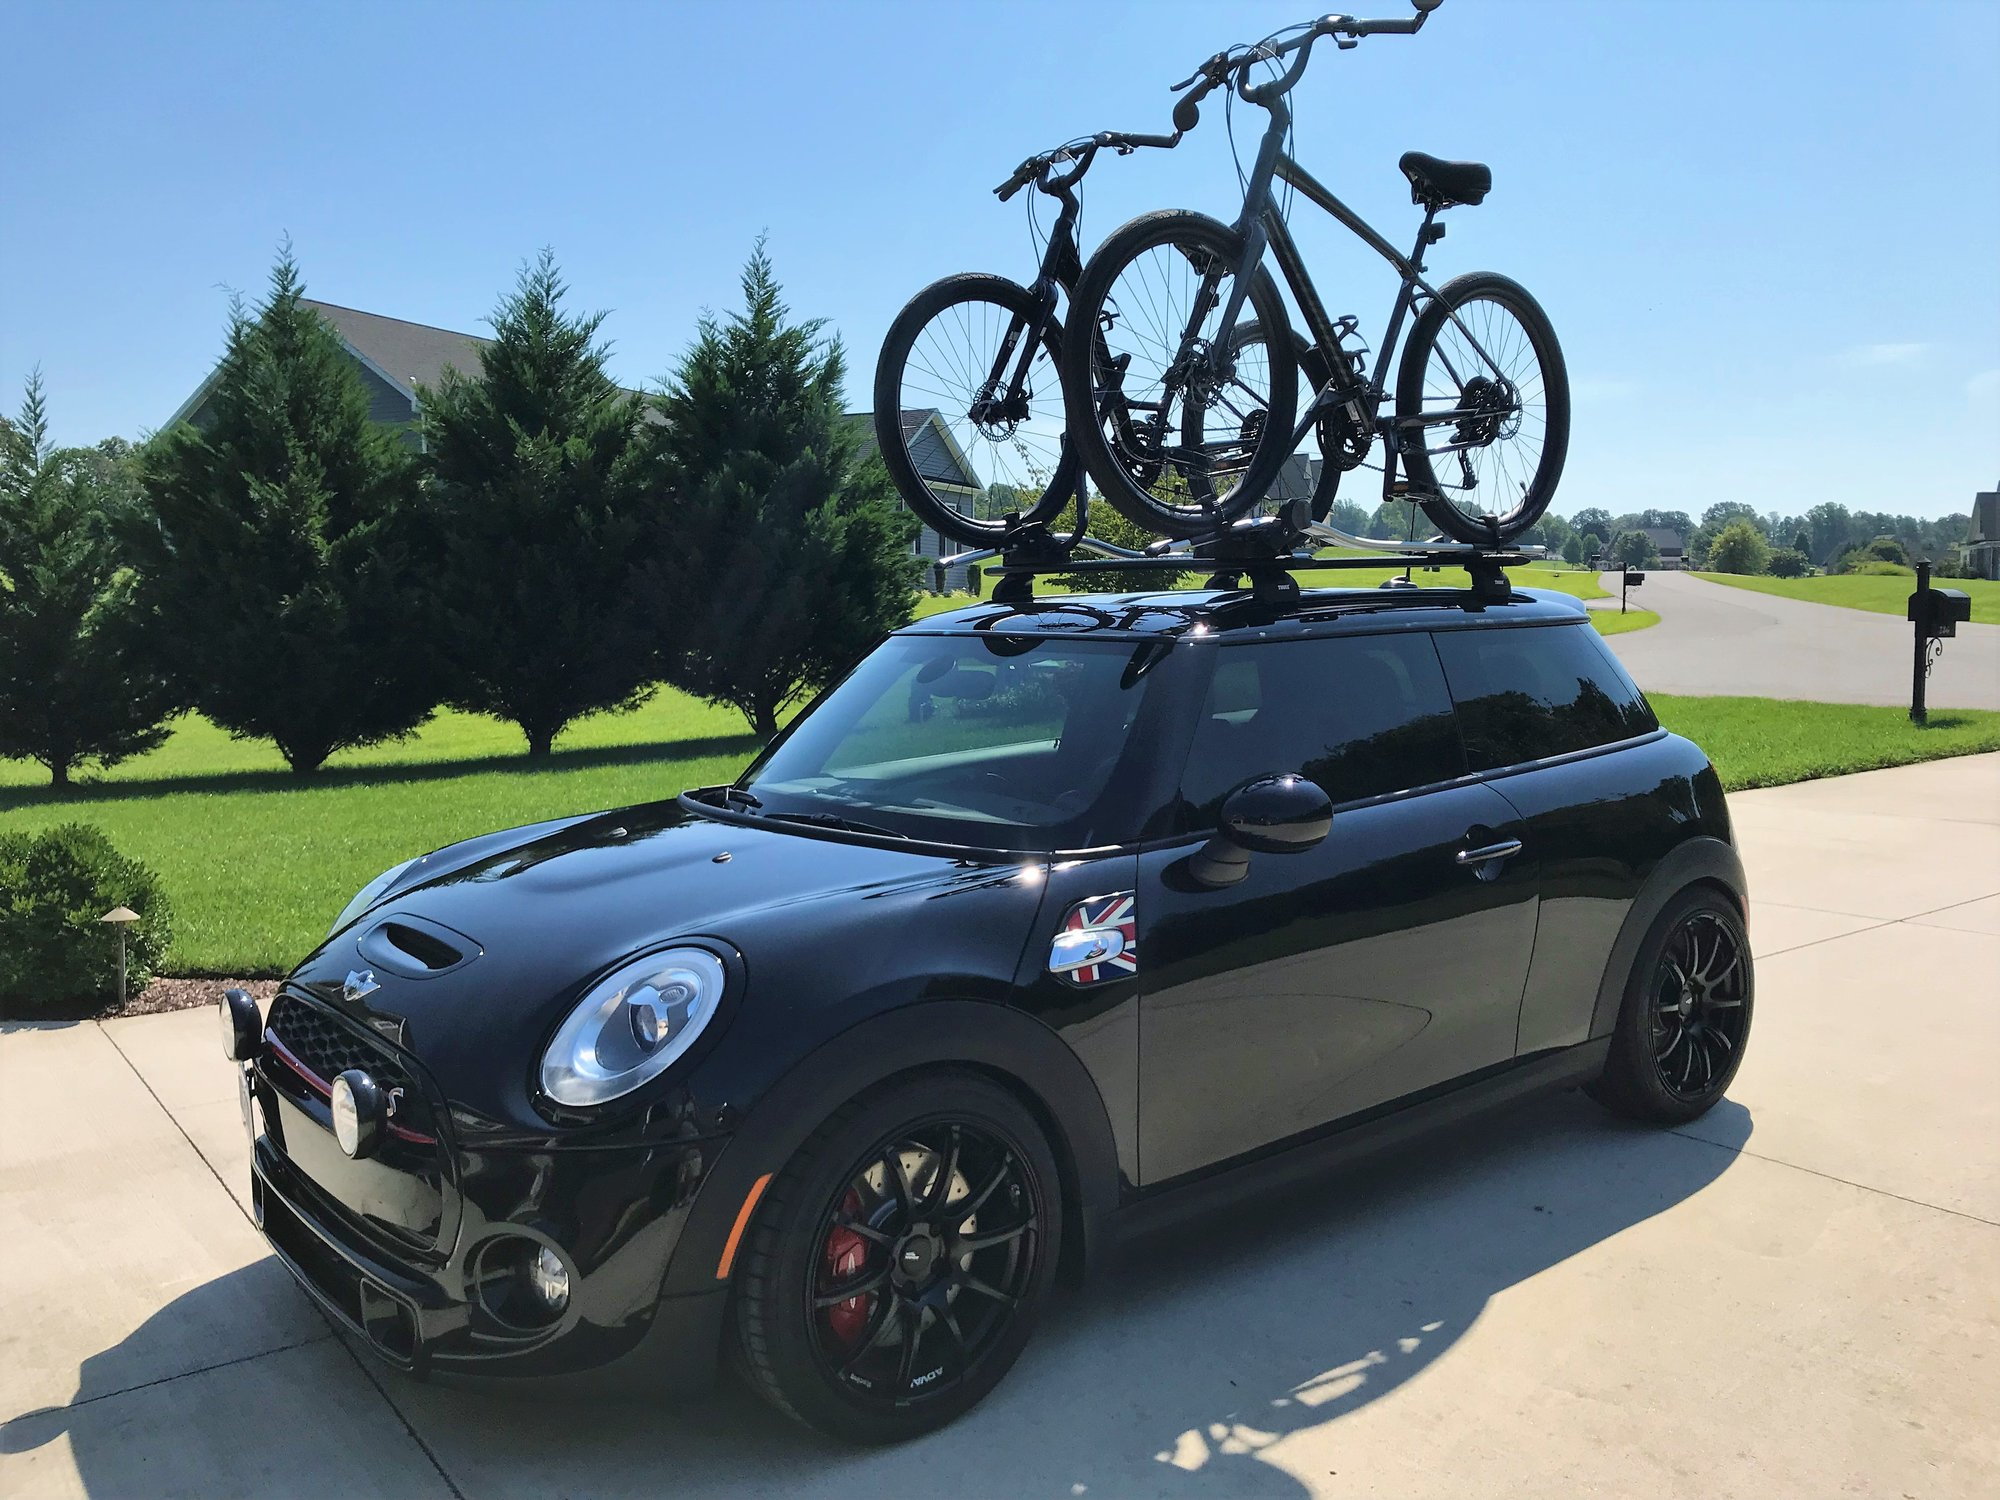 Thule Roof Rack System for FSeries Mini Cooper North American Motoring